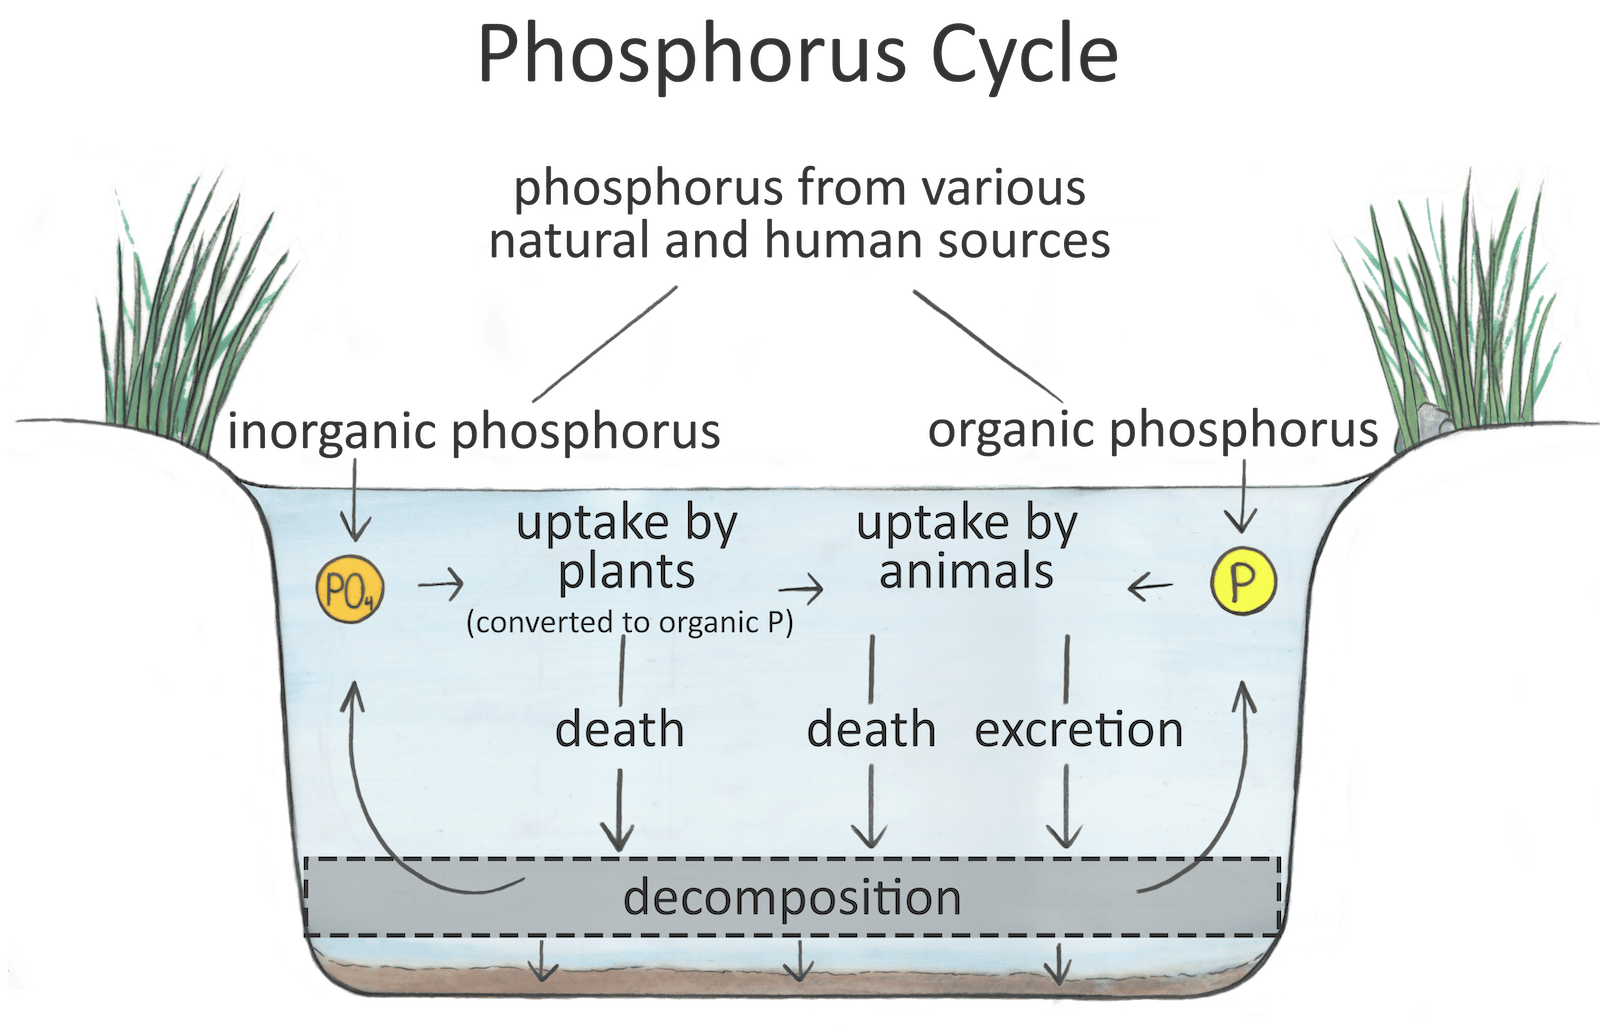 Hand drawn image of a pond cross section showing a diagram of the phosphorus cycle. Phosphorus from various natural and human sources enters water as inorganic and organic phosphorus. Organic phosphorus is taken up by animals. Inorganic phosphorus is converted to organic phosphorus as it is taken up by plants, and subsequently it is taken up by animals. Following decomposition of dead plants and animals and excretion, phosphorus re-enters the cycle in organic and inorganic forms. Some of the phosphorus originating from organic matter decay is deposited in sediments.